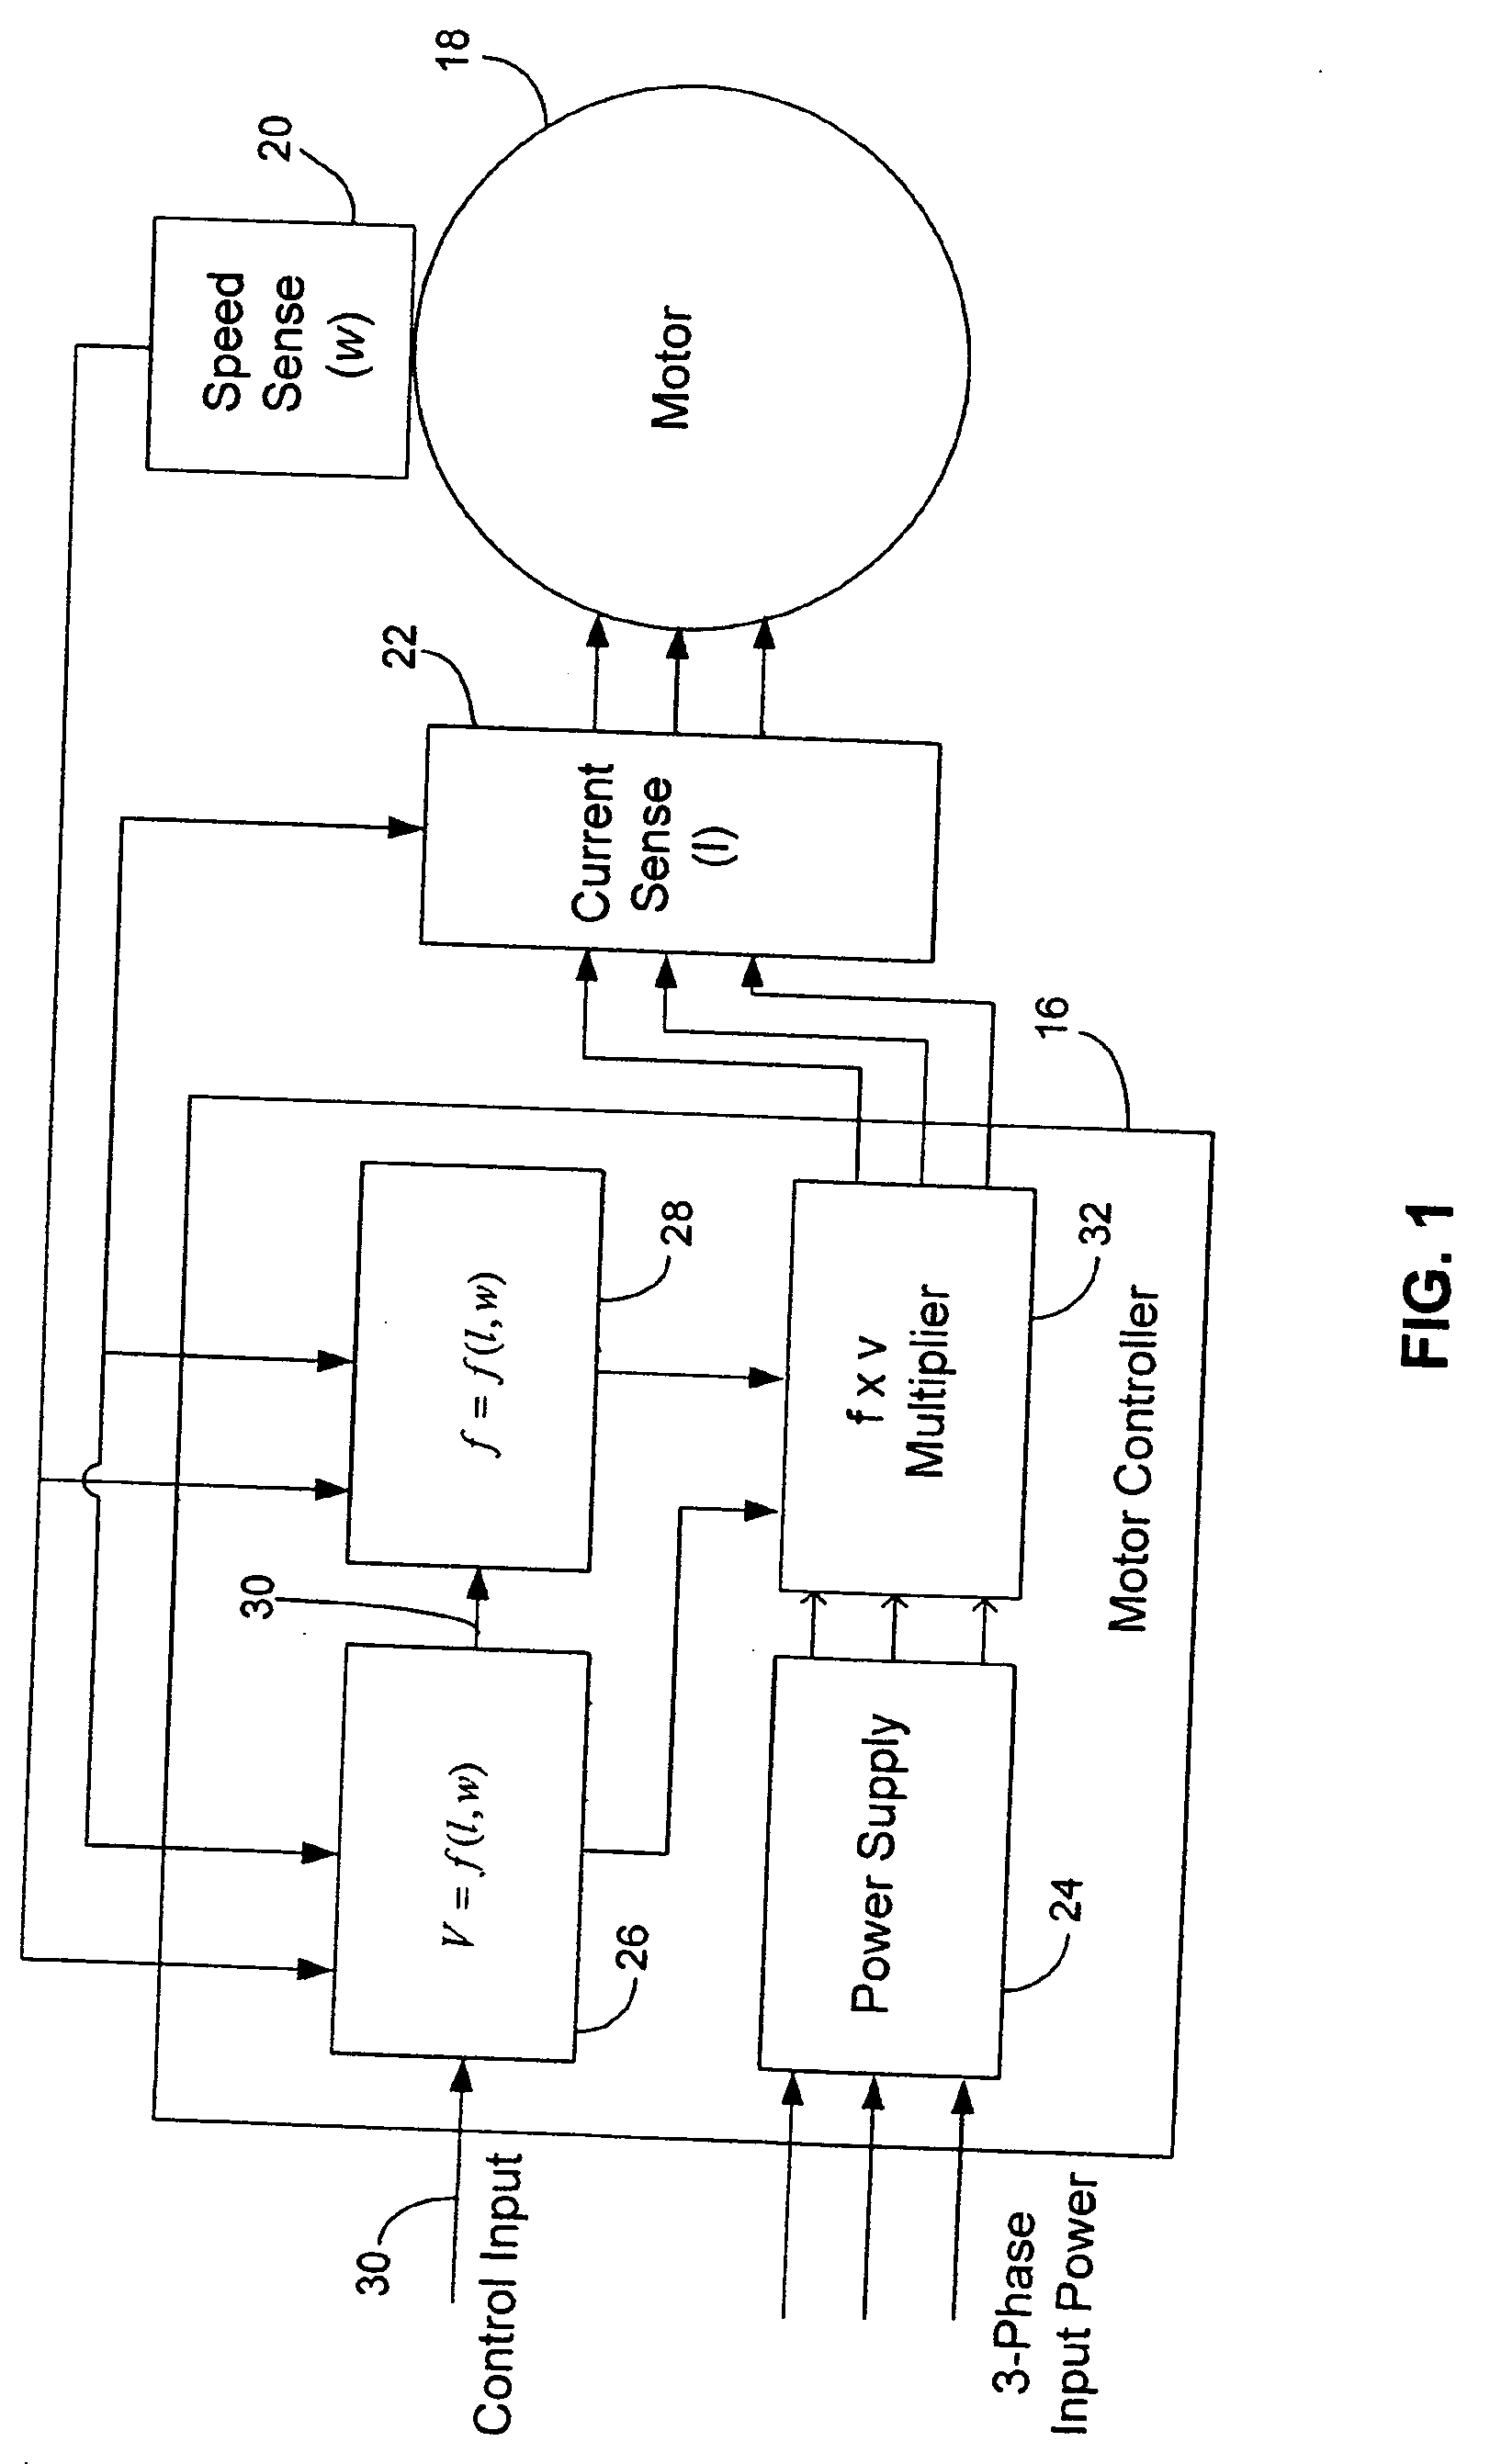 System and method for optimizing motor performance by varying flux